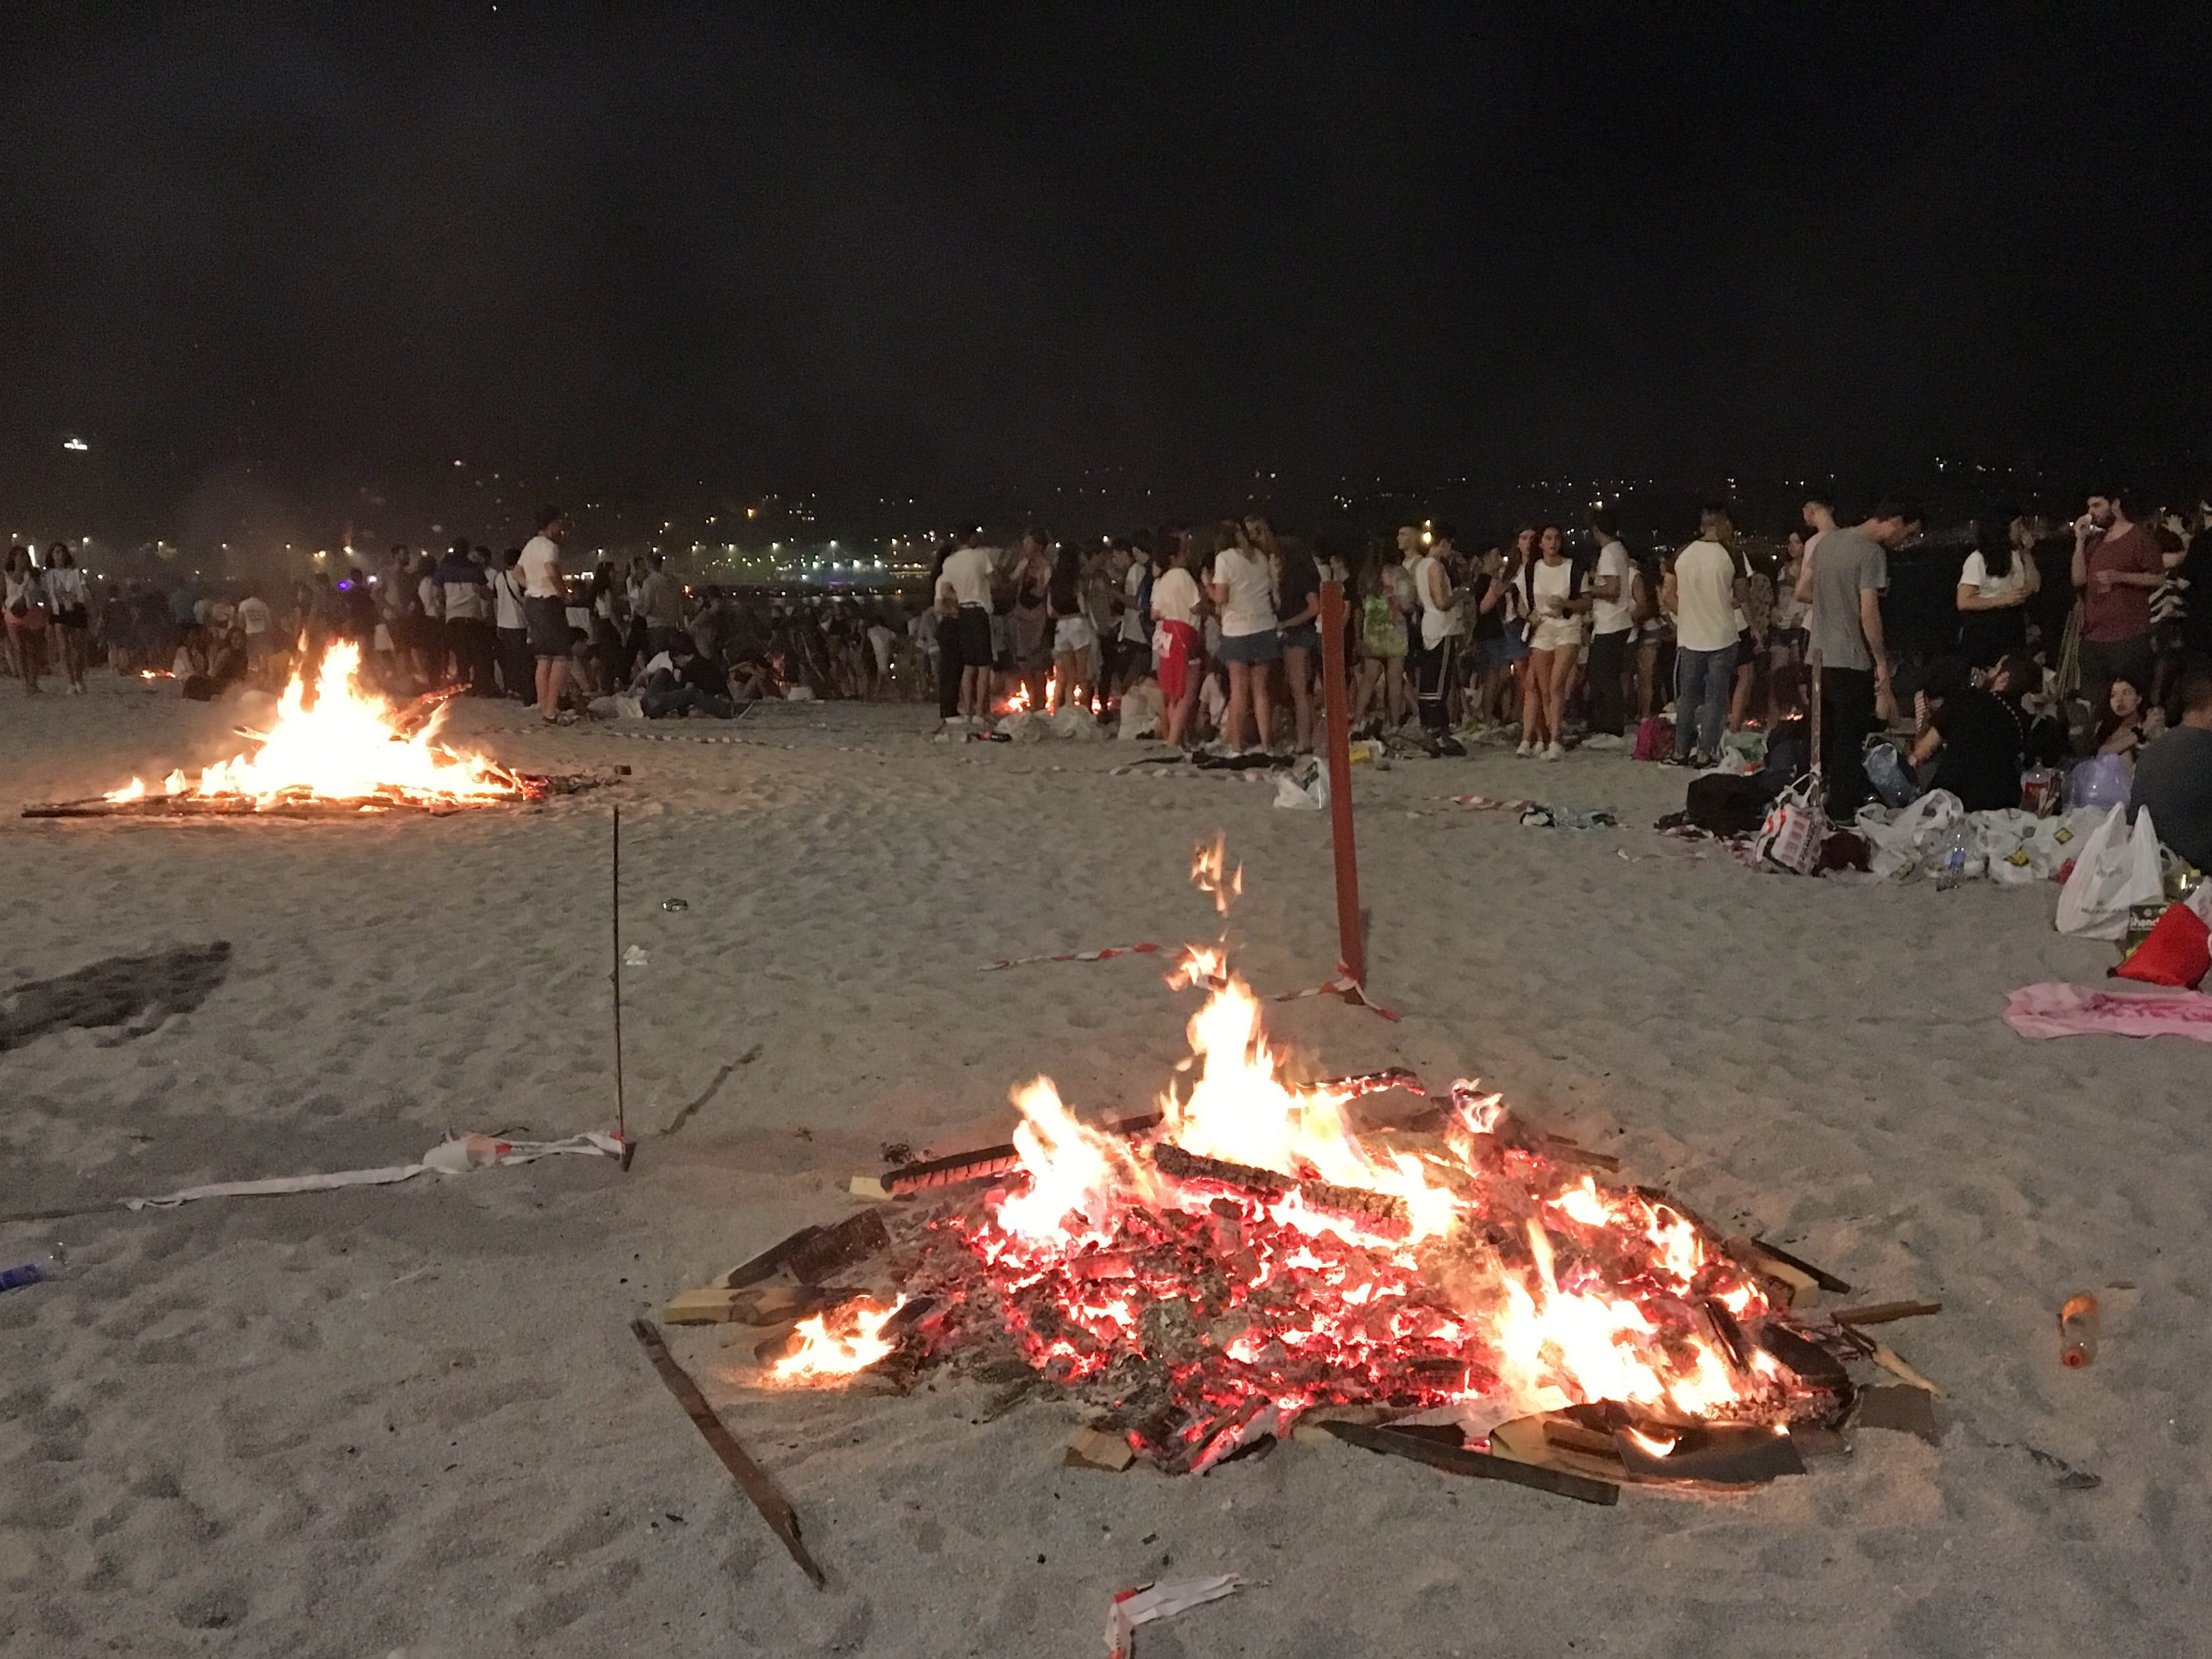 Jumping over a fire is one of the traditions of San Juan